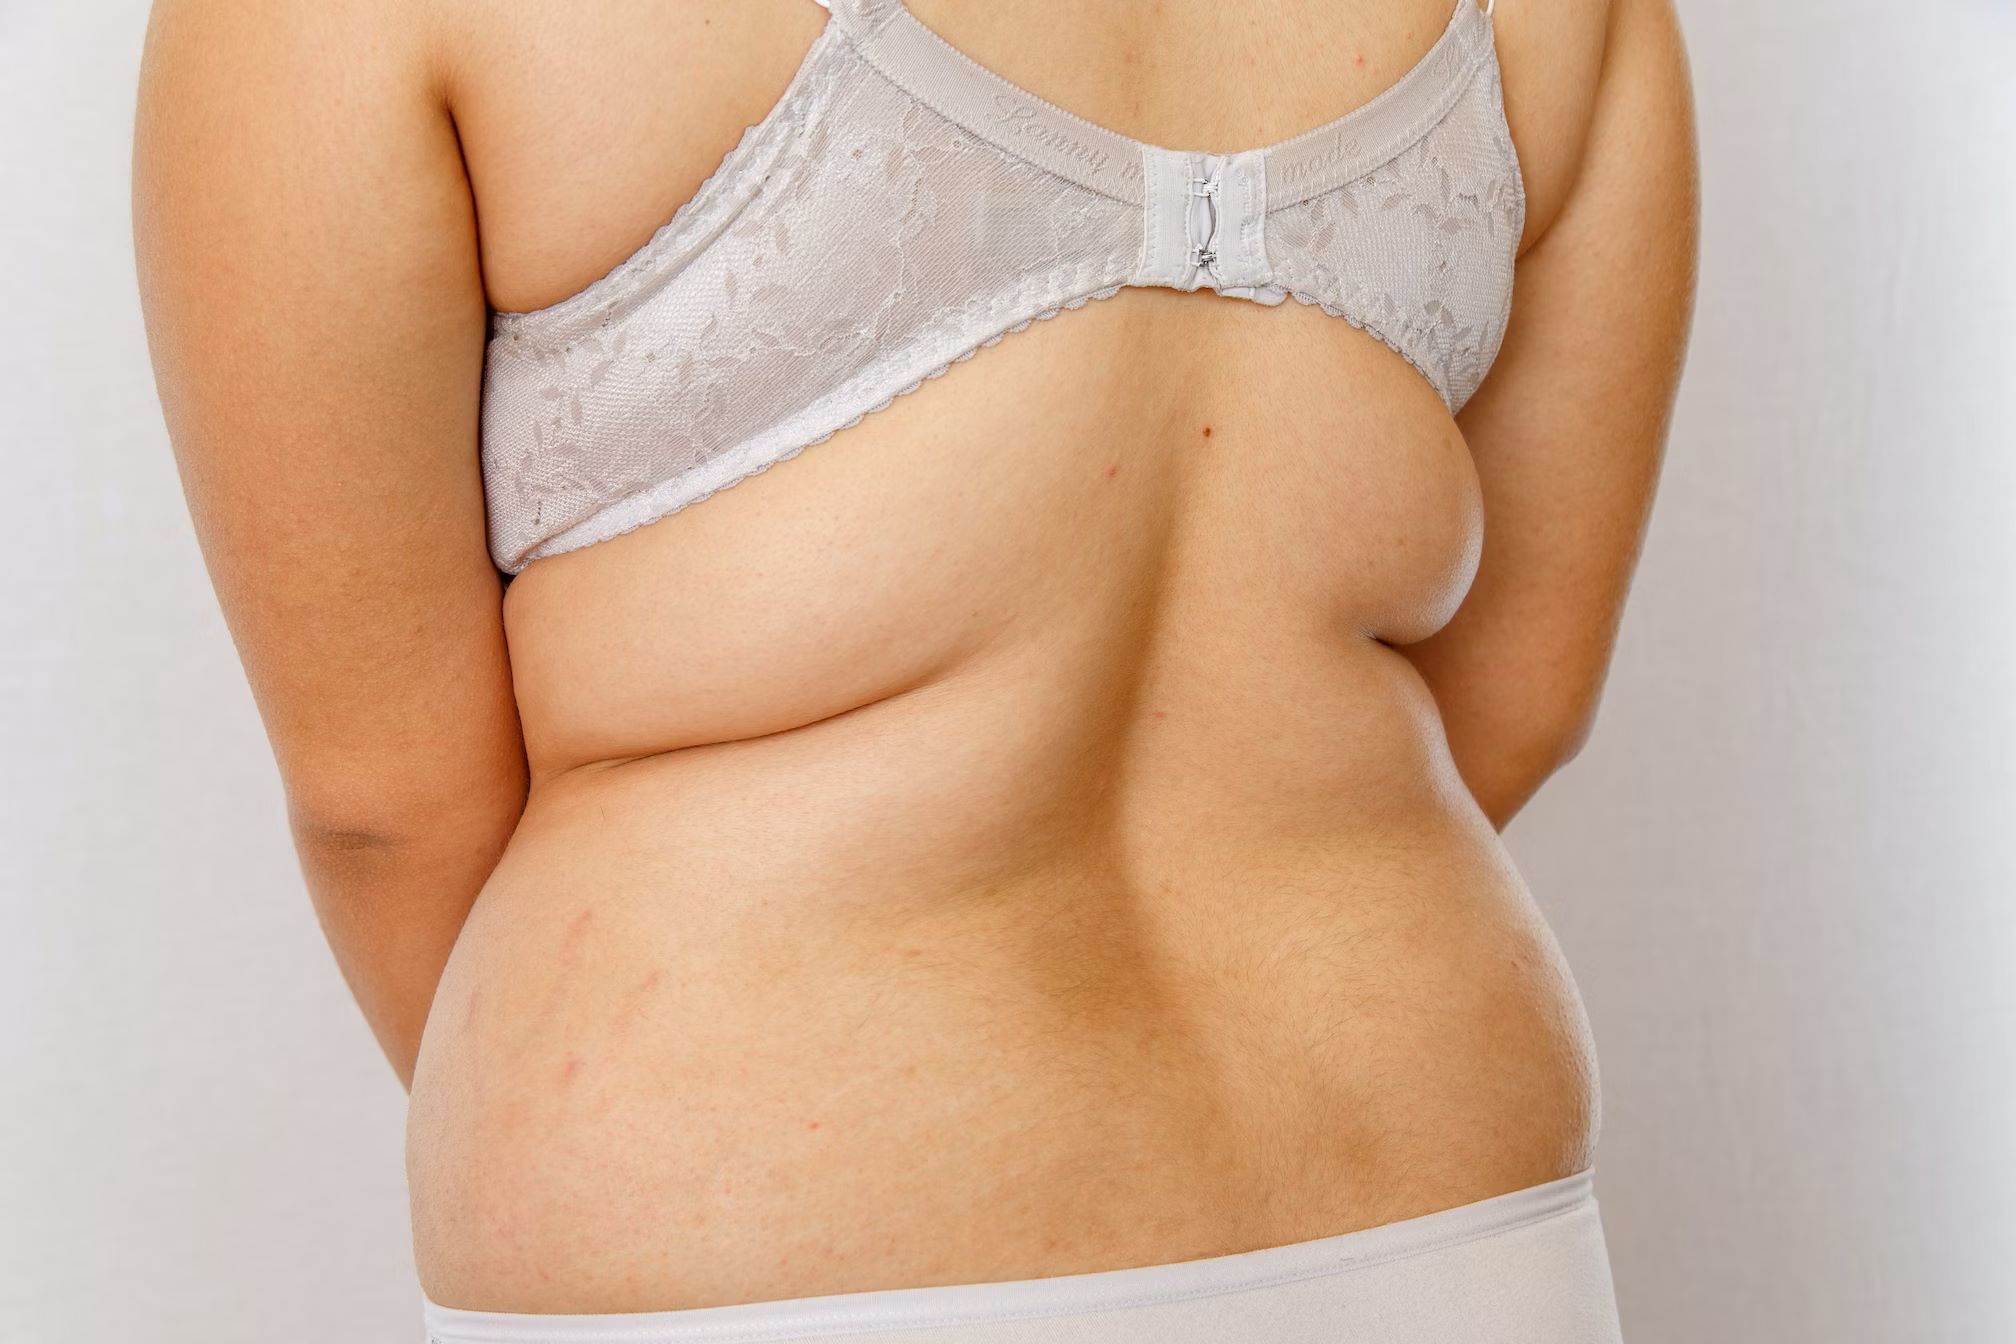 Say Goodbye To Those Pesky Fat Rolls Under Your Breasts With These Genius Tricks!